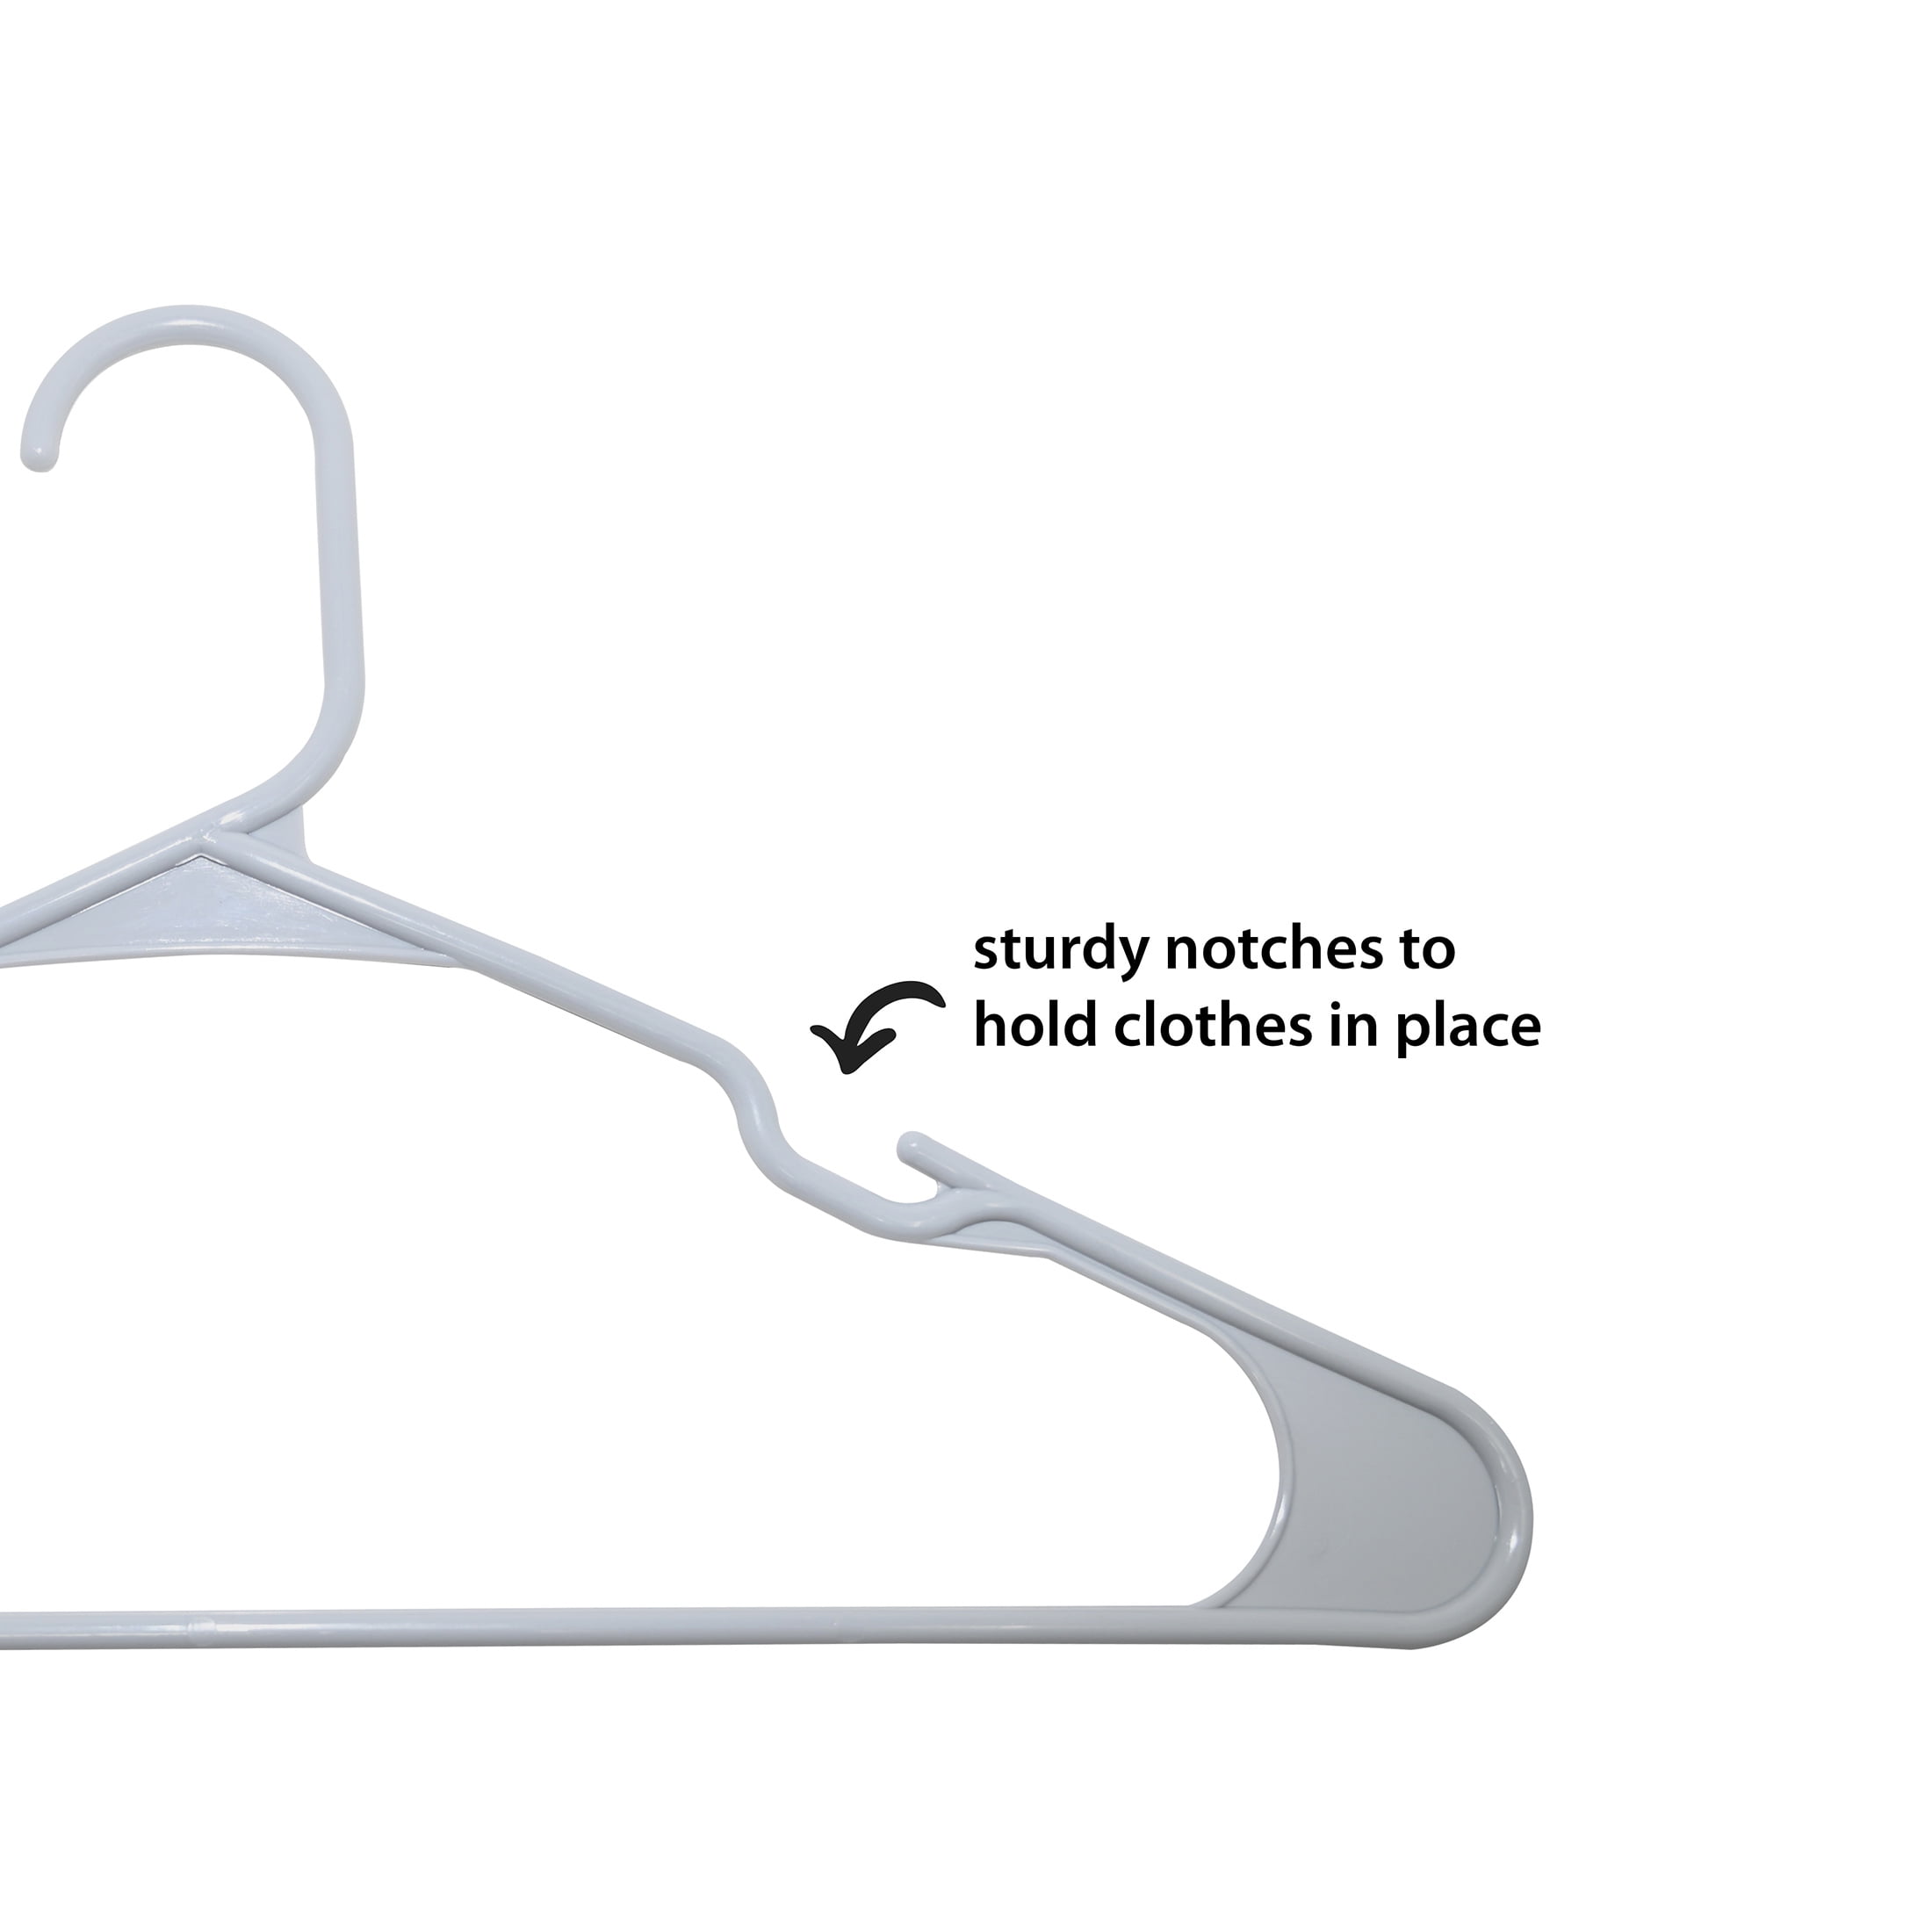 Mainstays Clothing Hangers, 100 Pack (2 box 50 pack), White, Durable Plastic